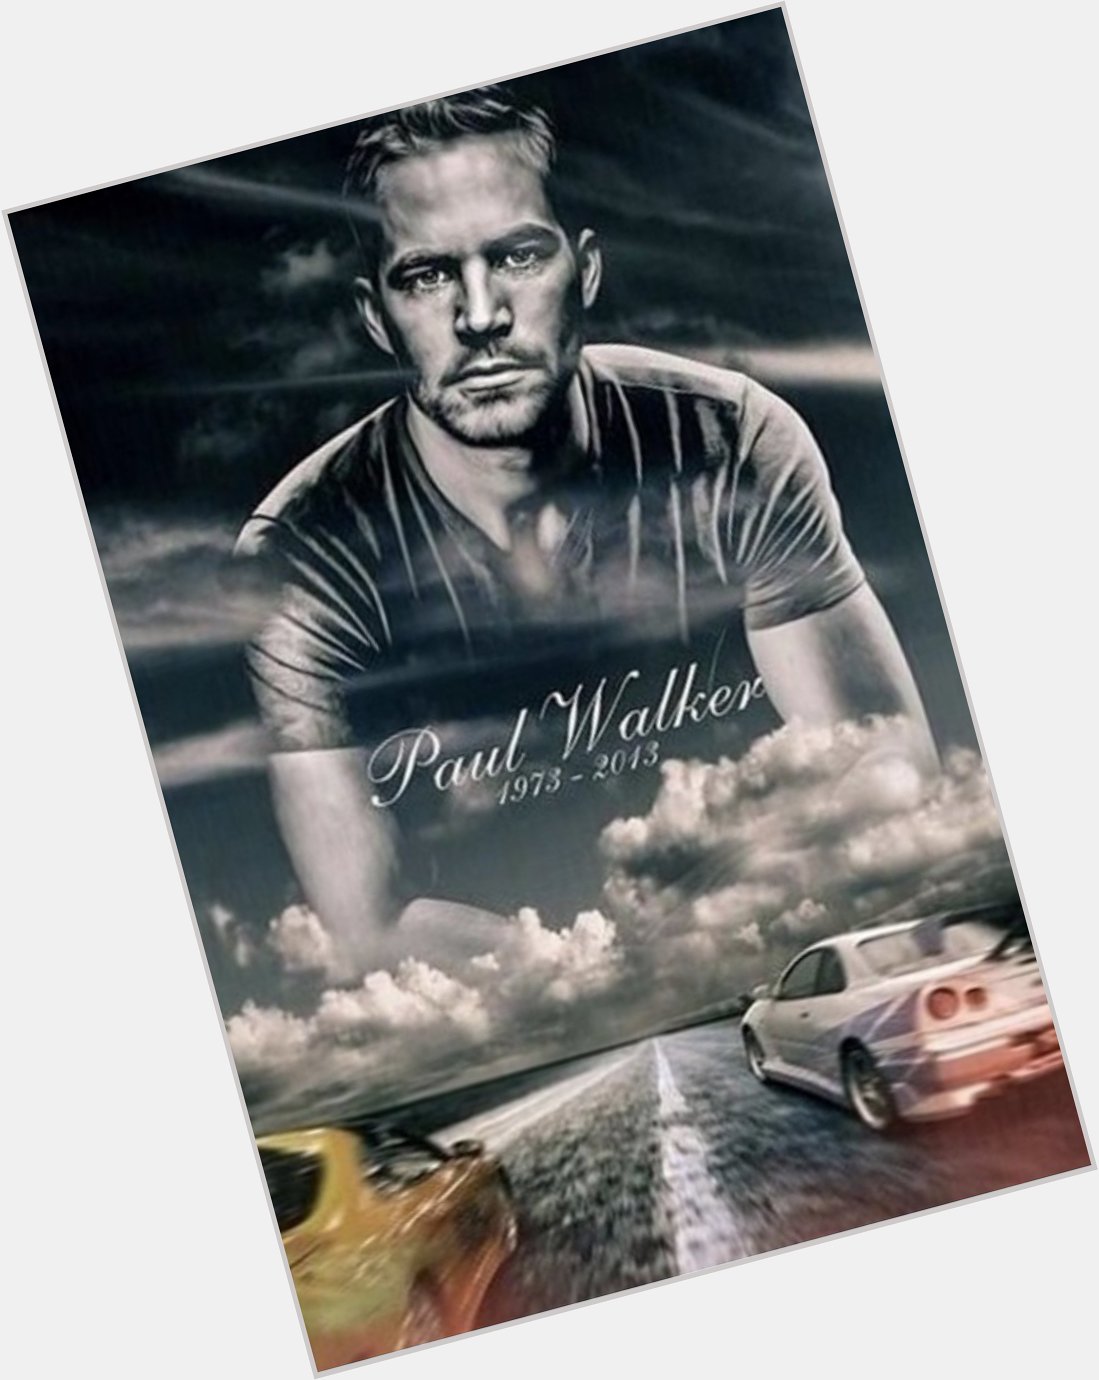 Not TJ related, but a respected birthday post to the legend. Happy birthday Paul Walker. 